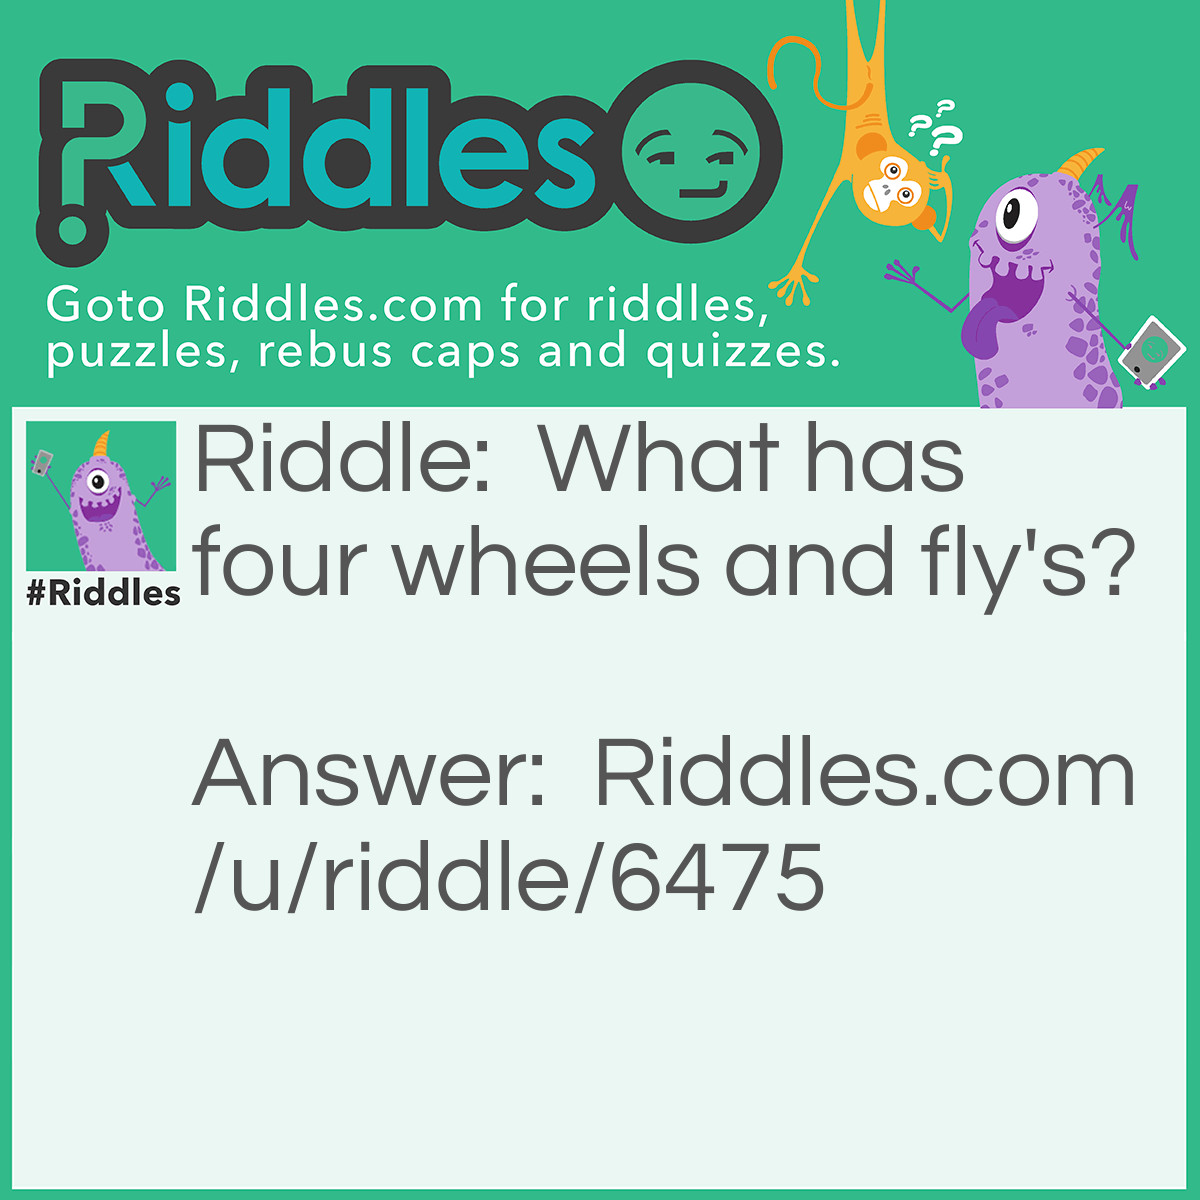 Riddle: What has four wheels and fly's? Answer: A garbage truck.